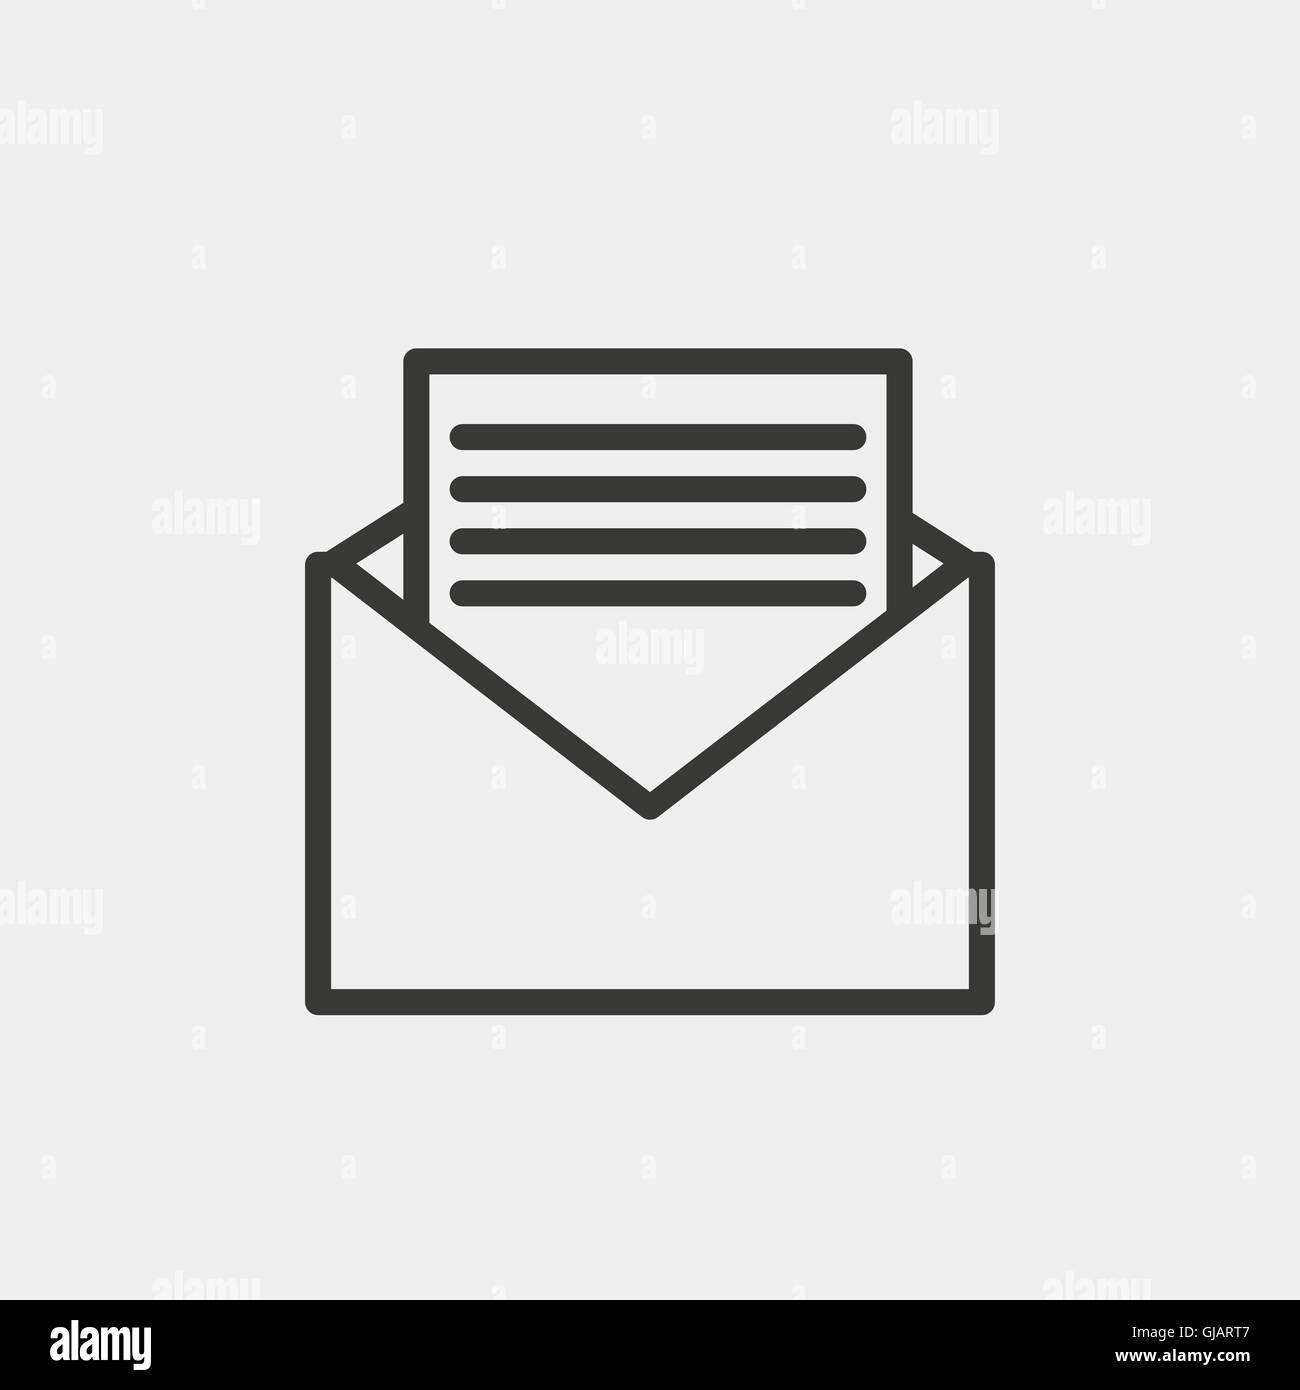 Open Envelope With Letter Icon Of Brown Outline For Illustration